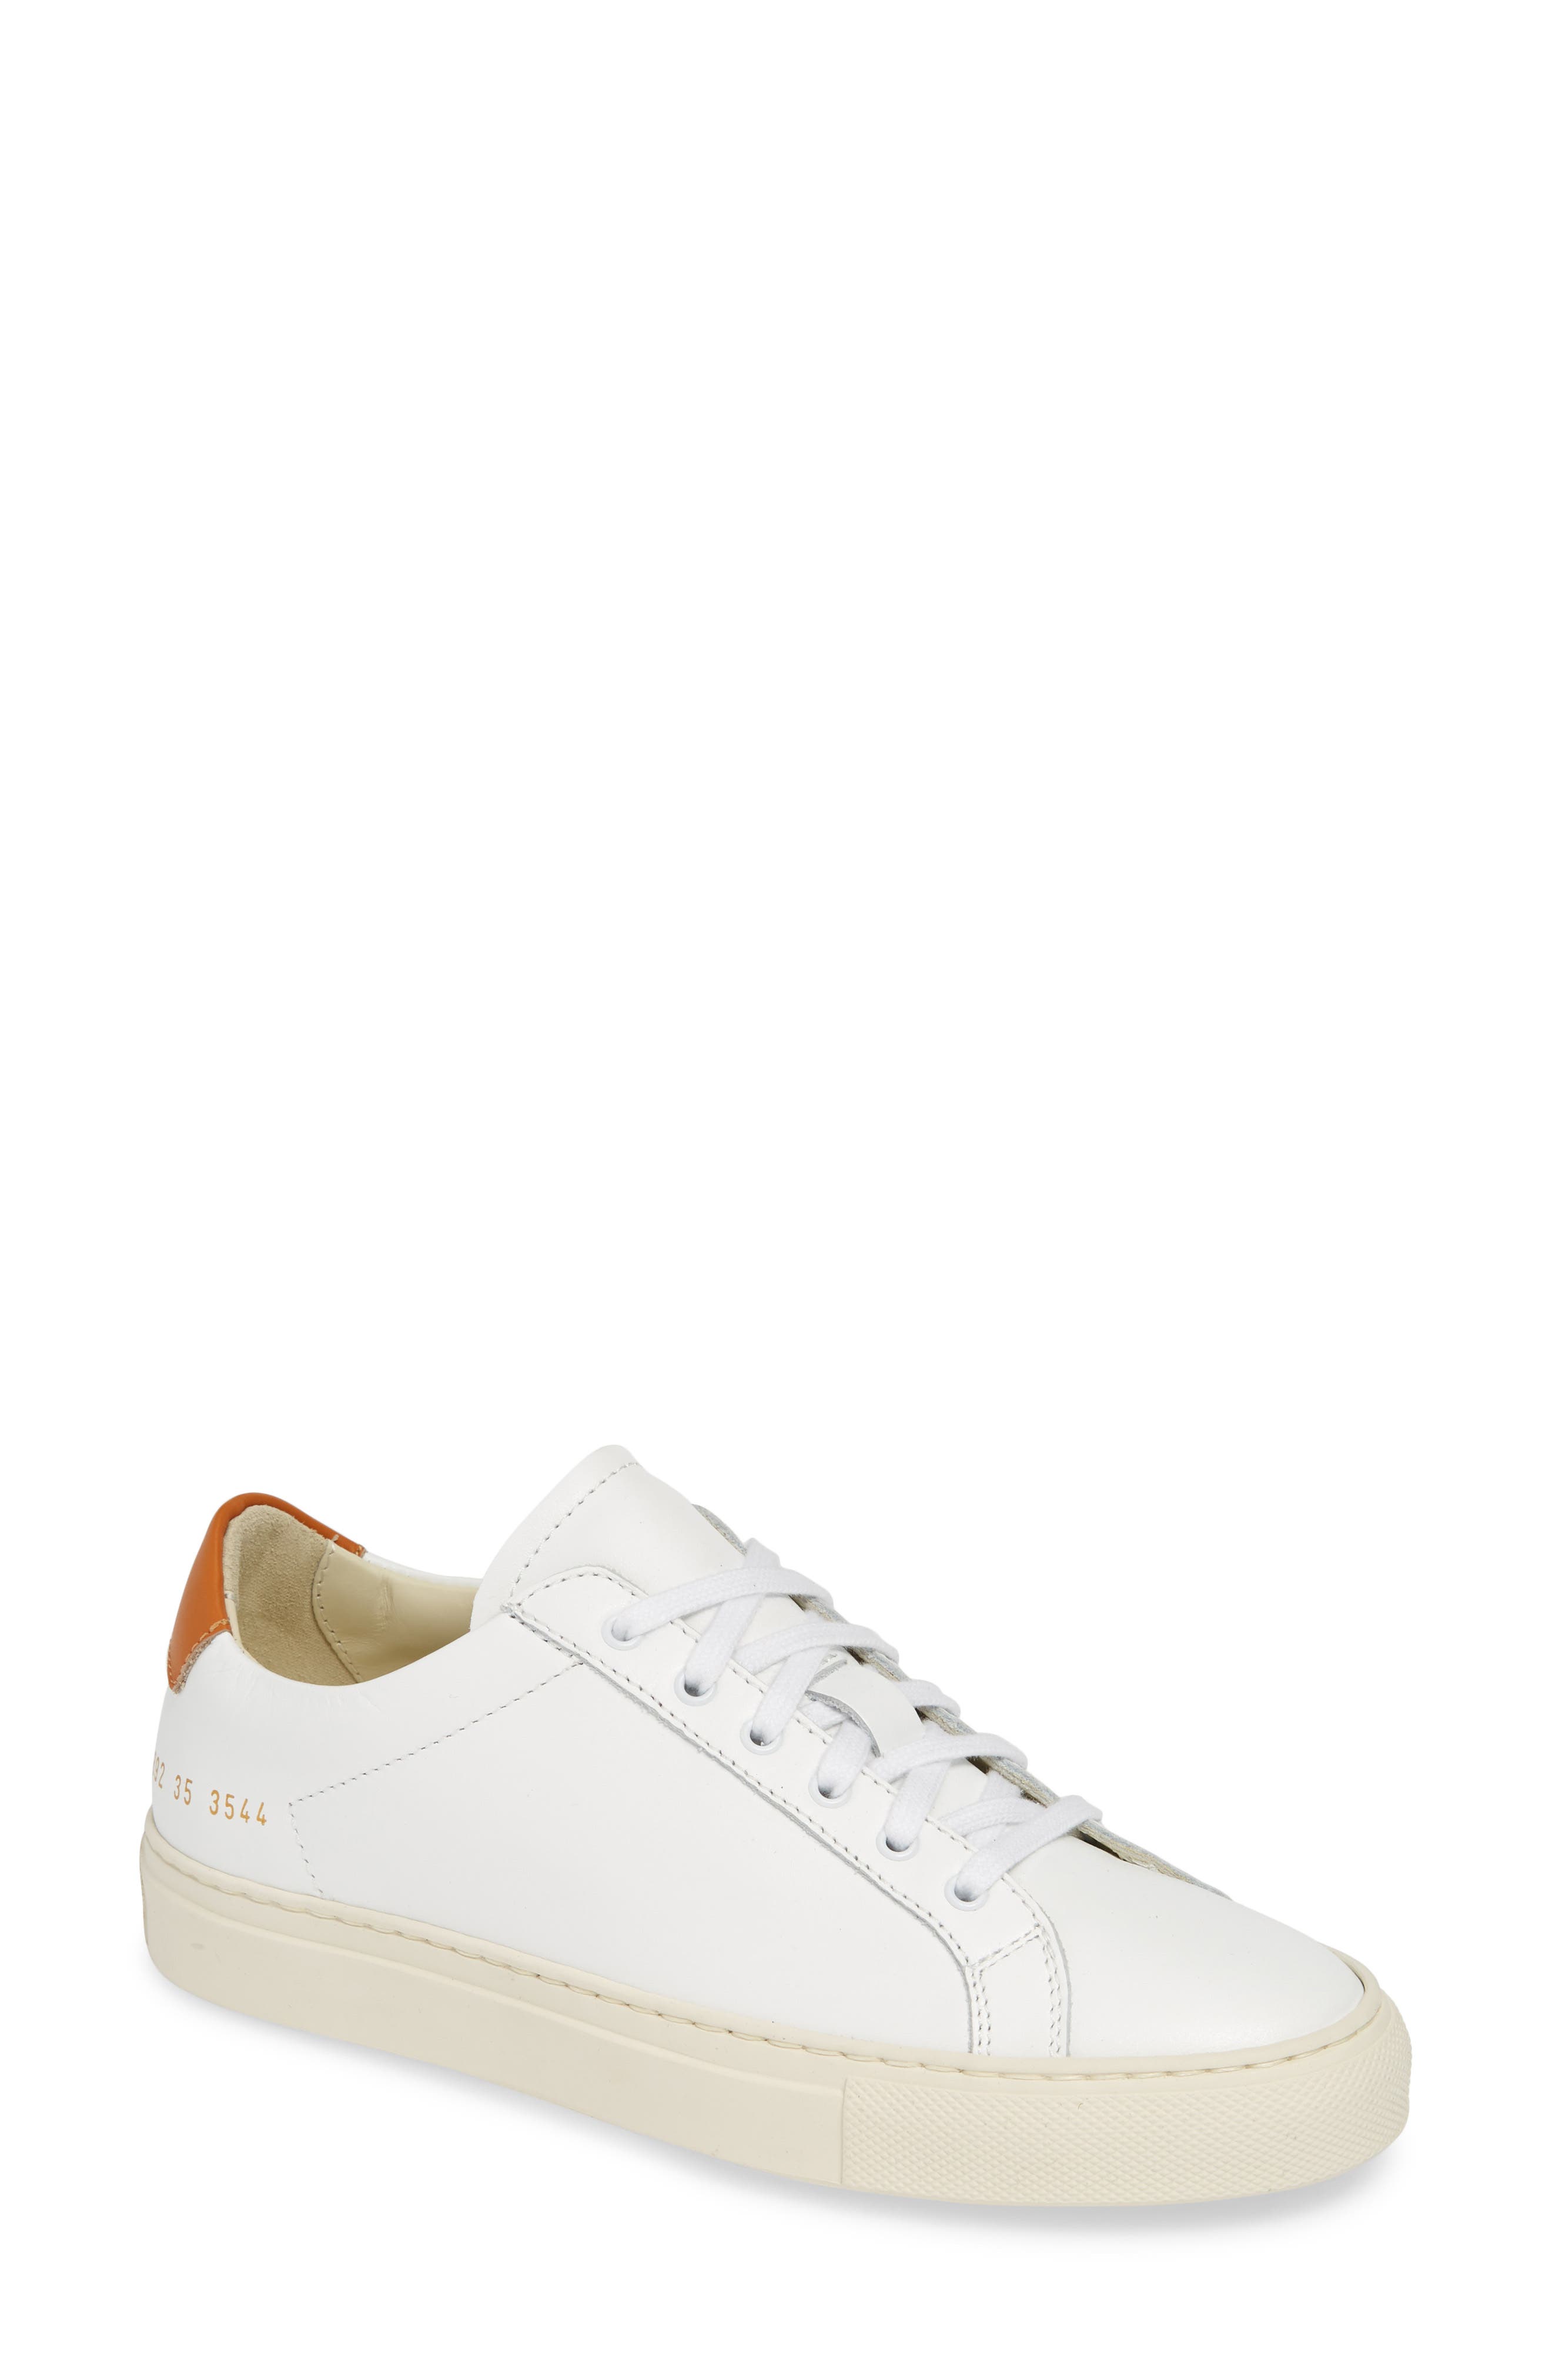 Common Projects Retro Low Top Sneaker 